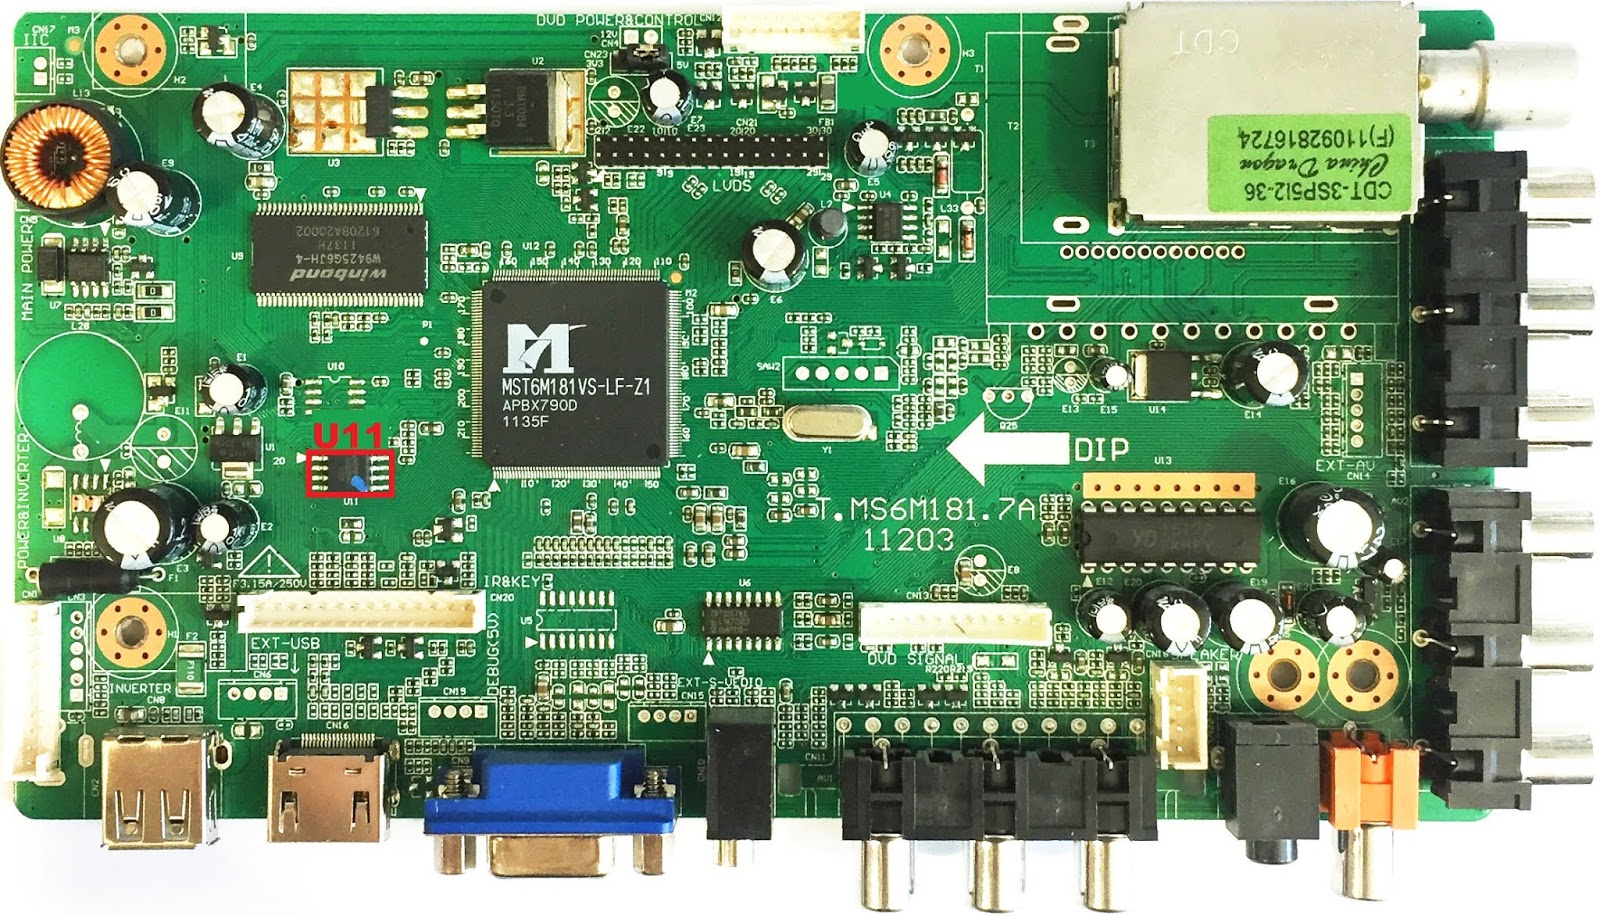 T.ms6M181.7A-Firmware